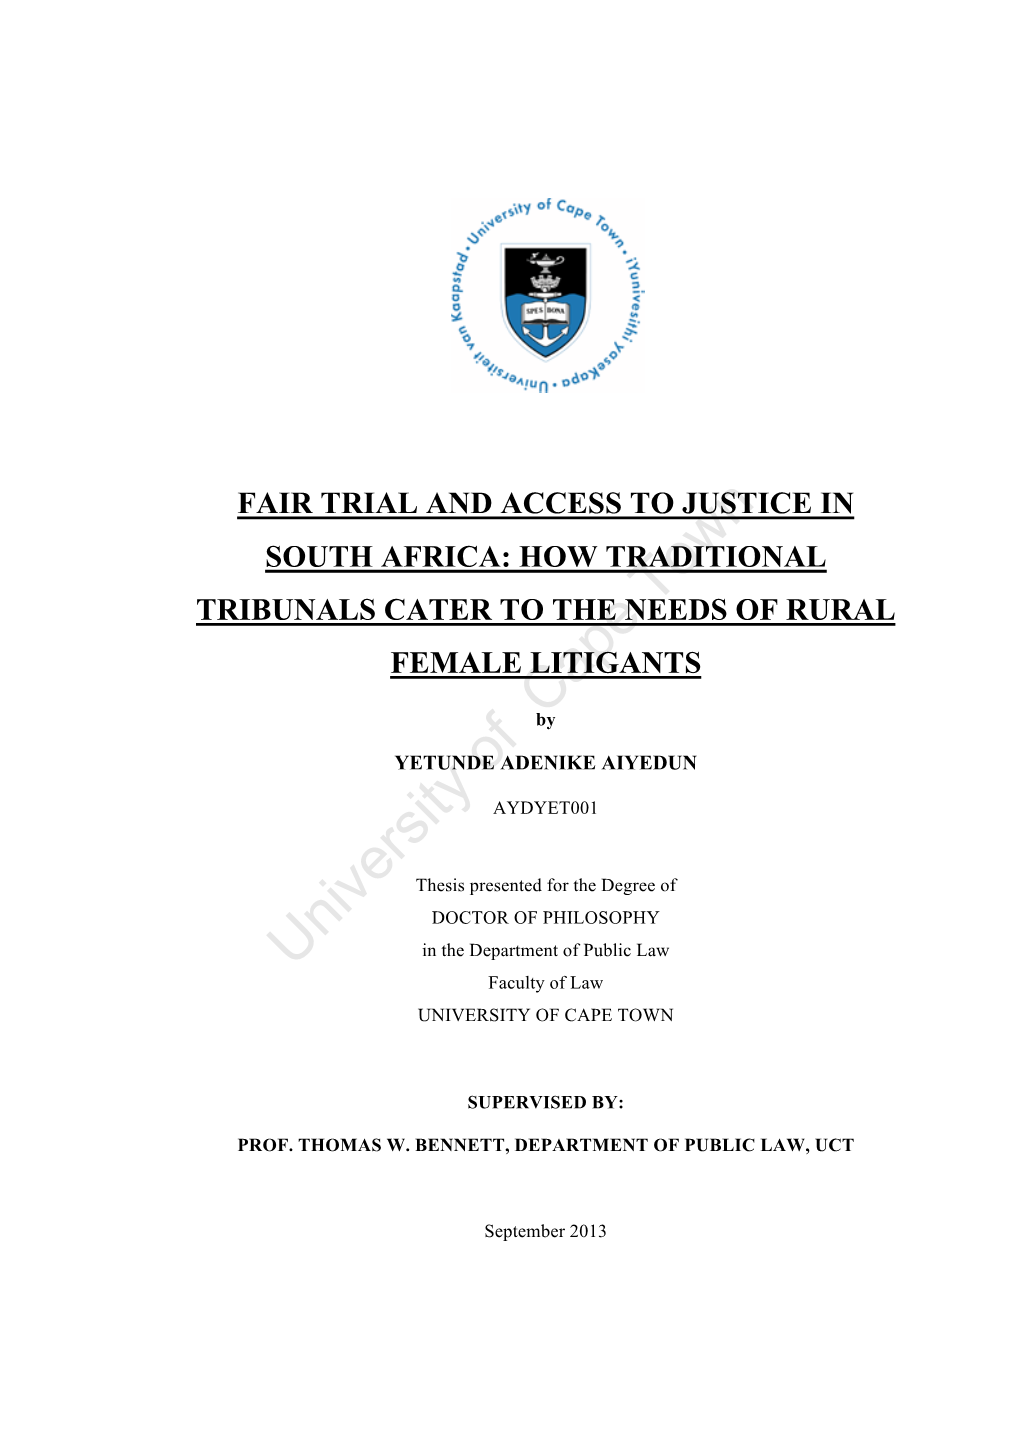 Fair Trial and Access to Justice in South Africa: How Traditional Tribunals Cater to the Needs of Rural Female Litigants